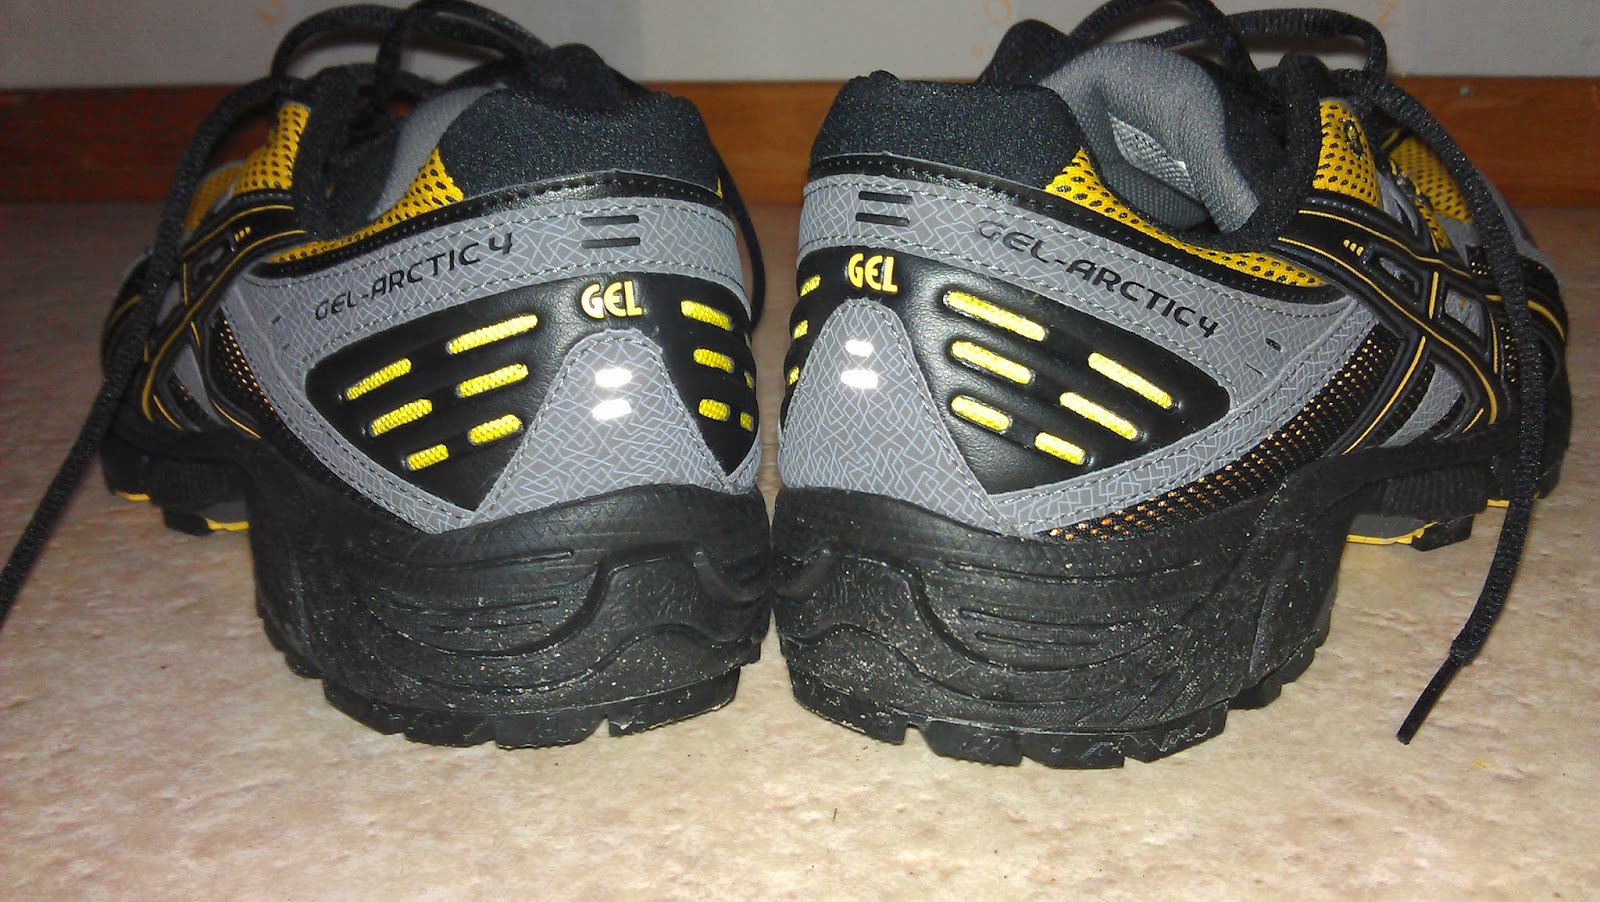 Essential Run: Review: Asics Gel-Arctic 4 WR shoes - winter running on ...